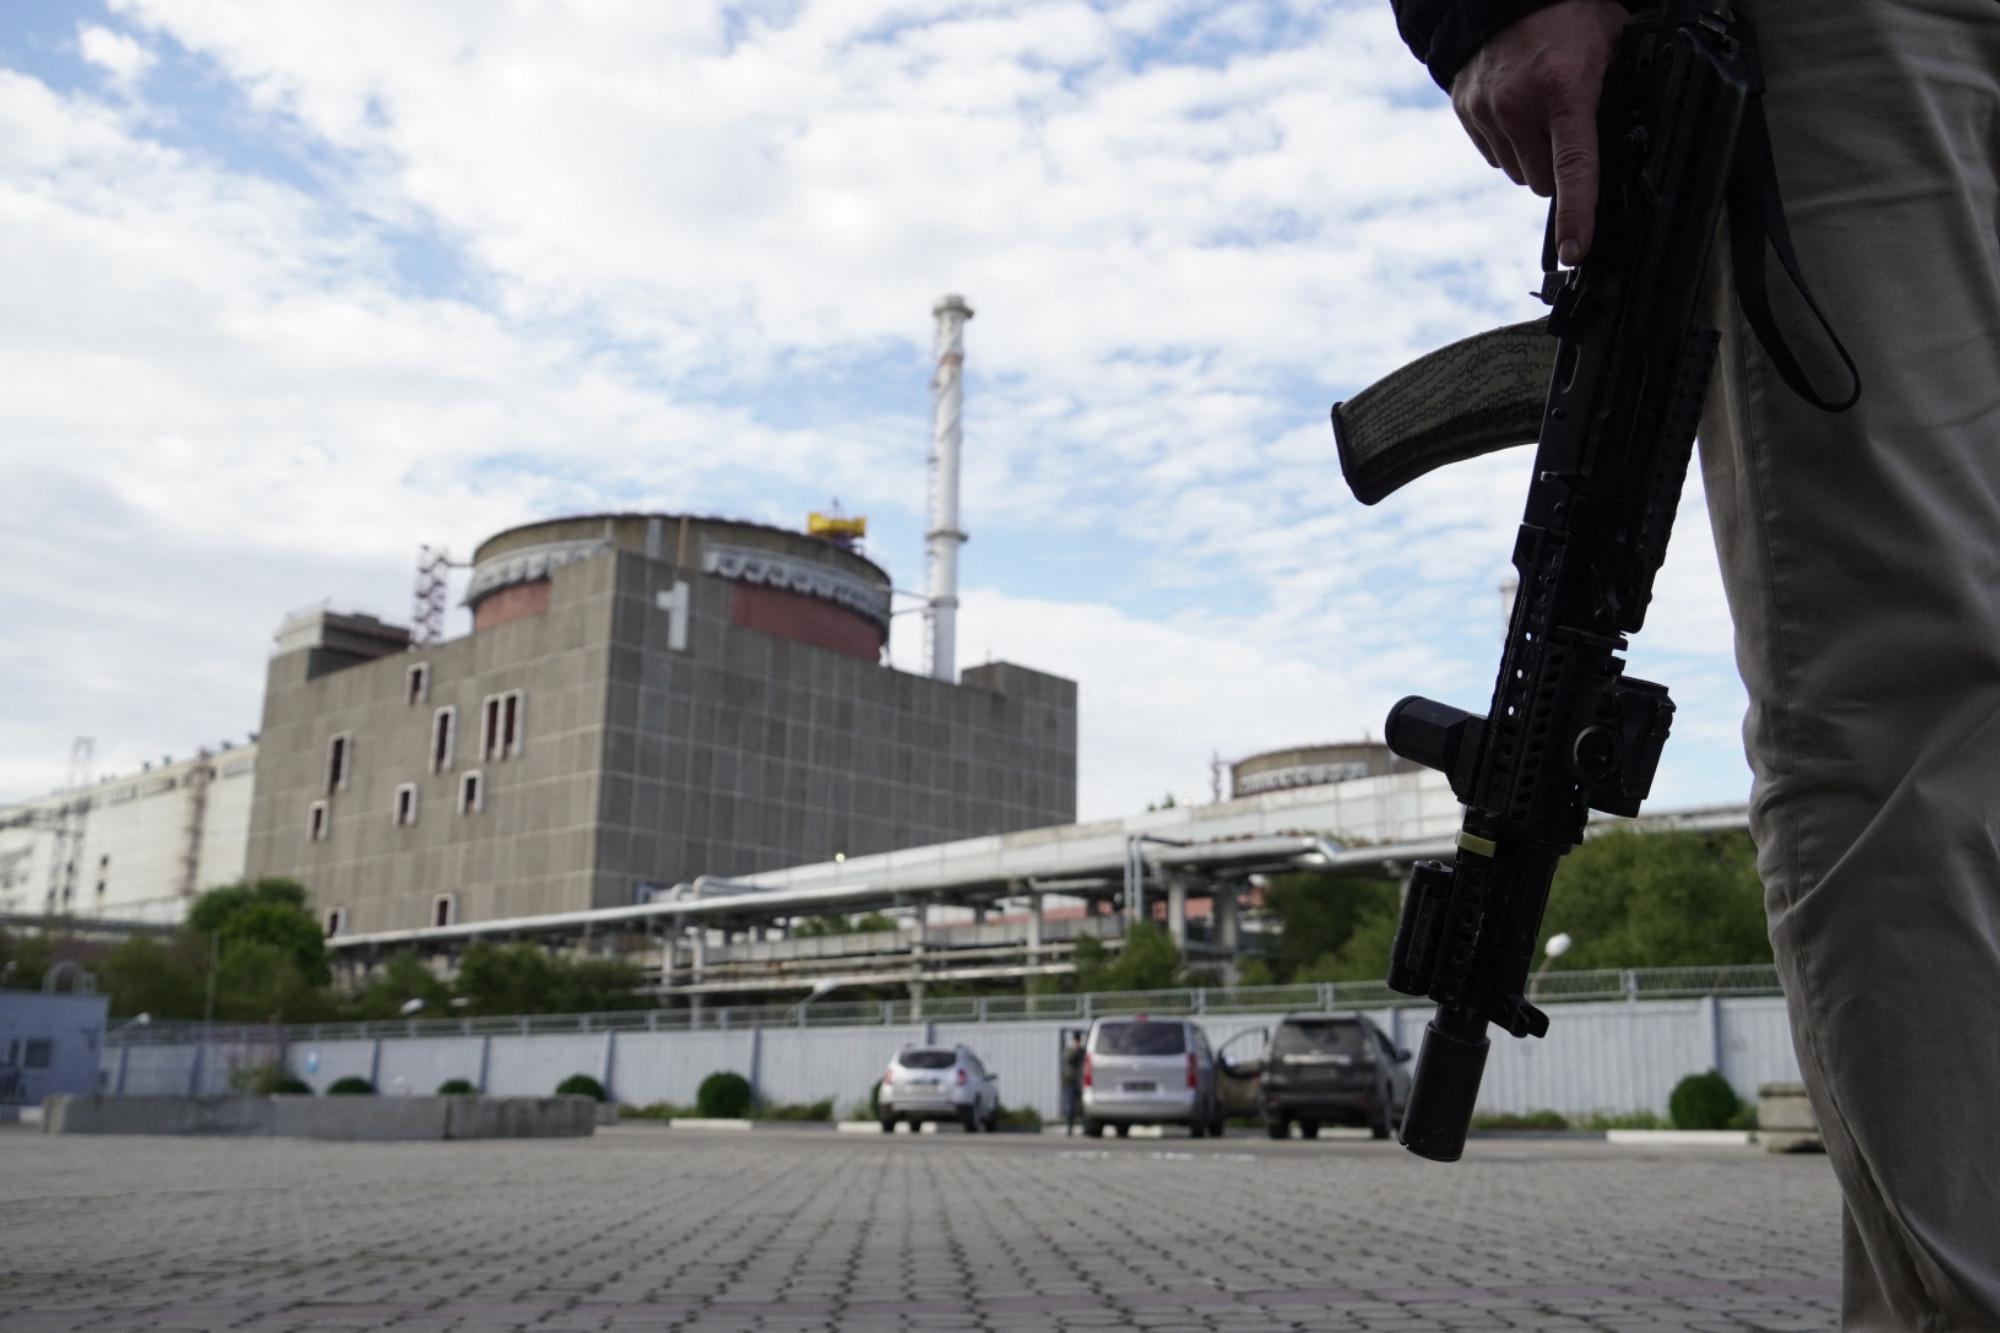 Ukraine, Russia and the IAEA ultimatum on Zaporizhia: “Soldiers and weapons are increasing”